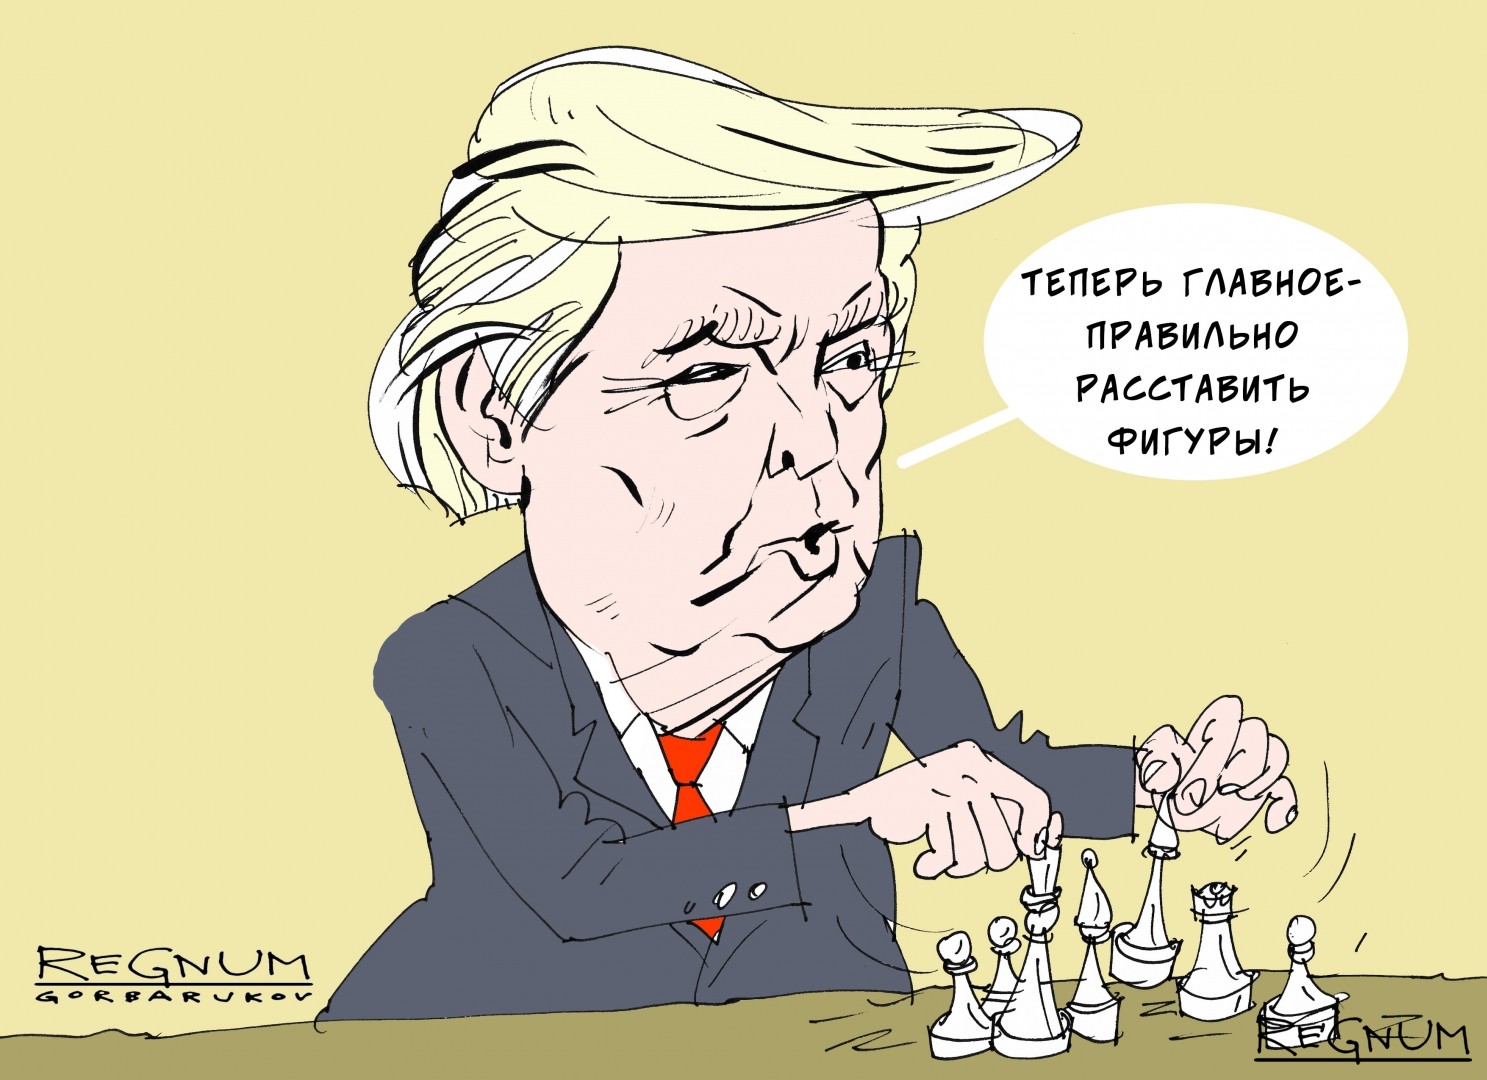 Trump: "Now, most importanly, to properly position the pieces!" (Russian political cartoon: Gorbarukov, Regnum.ru)